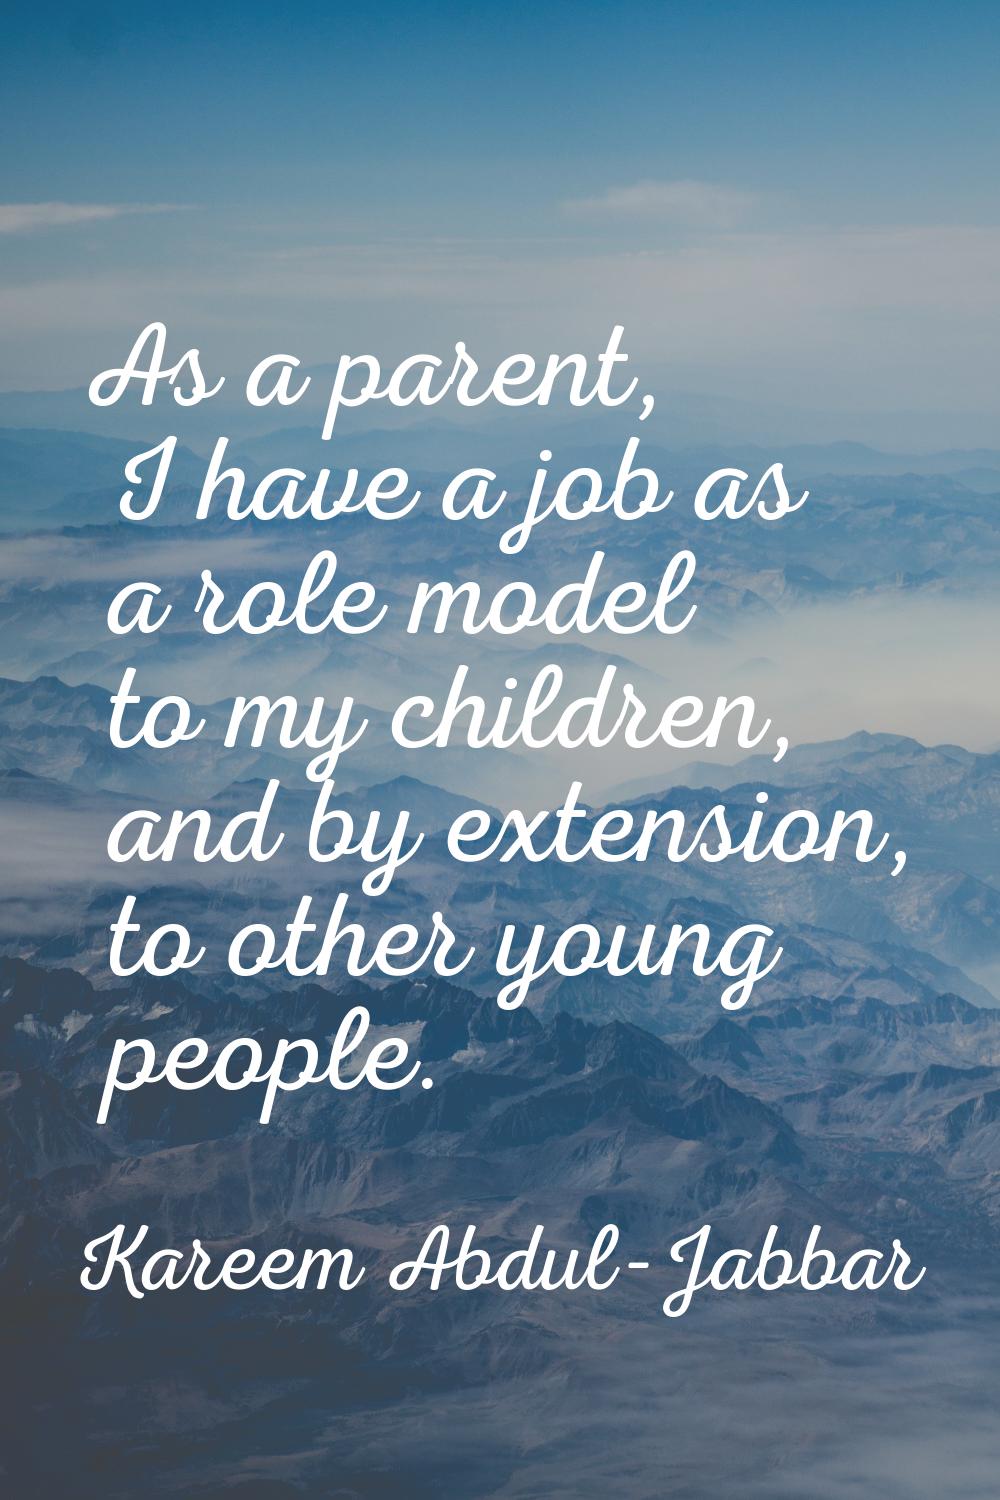 As a parent, I have a job as a role model to my children, and by extension, to other young people.